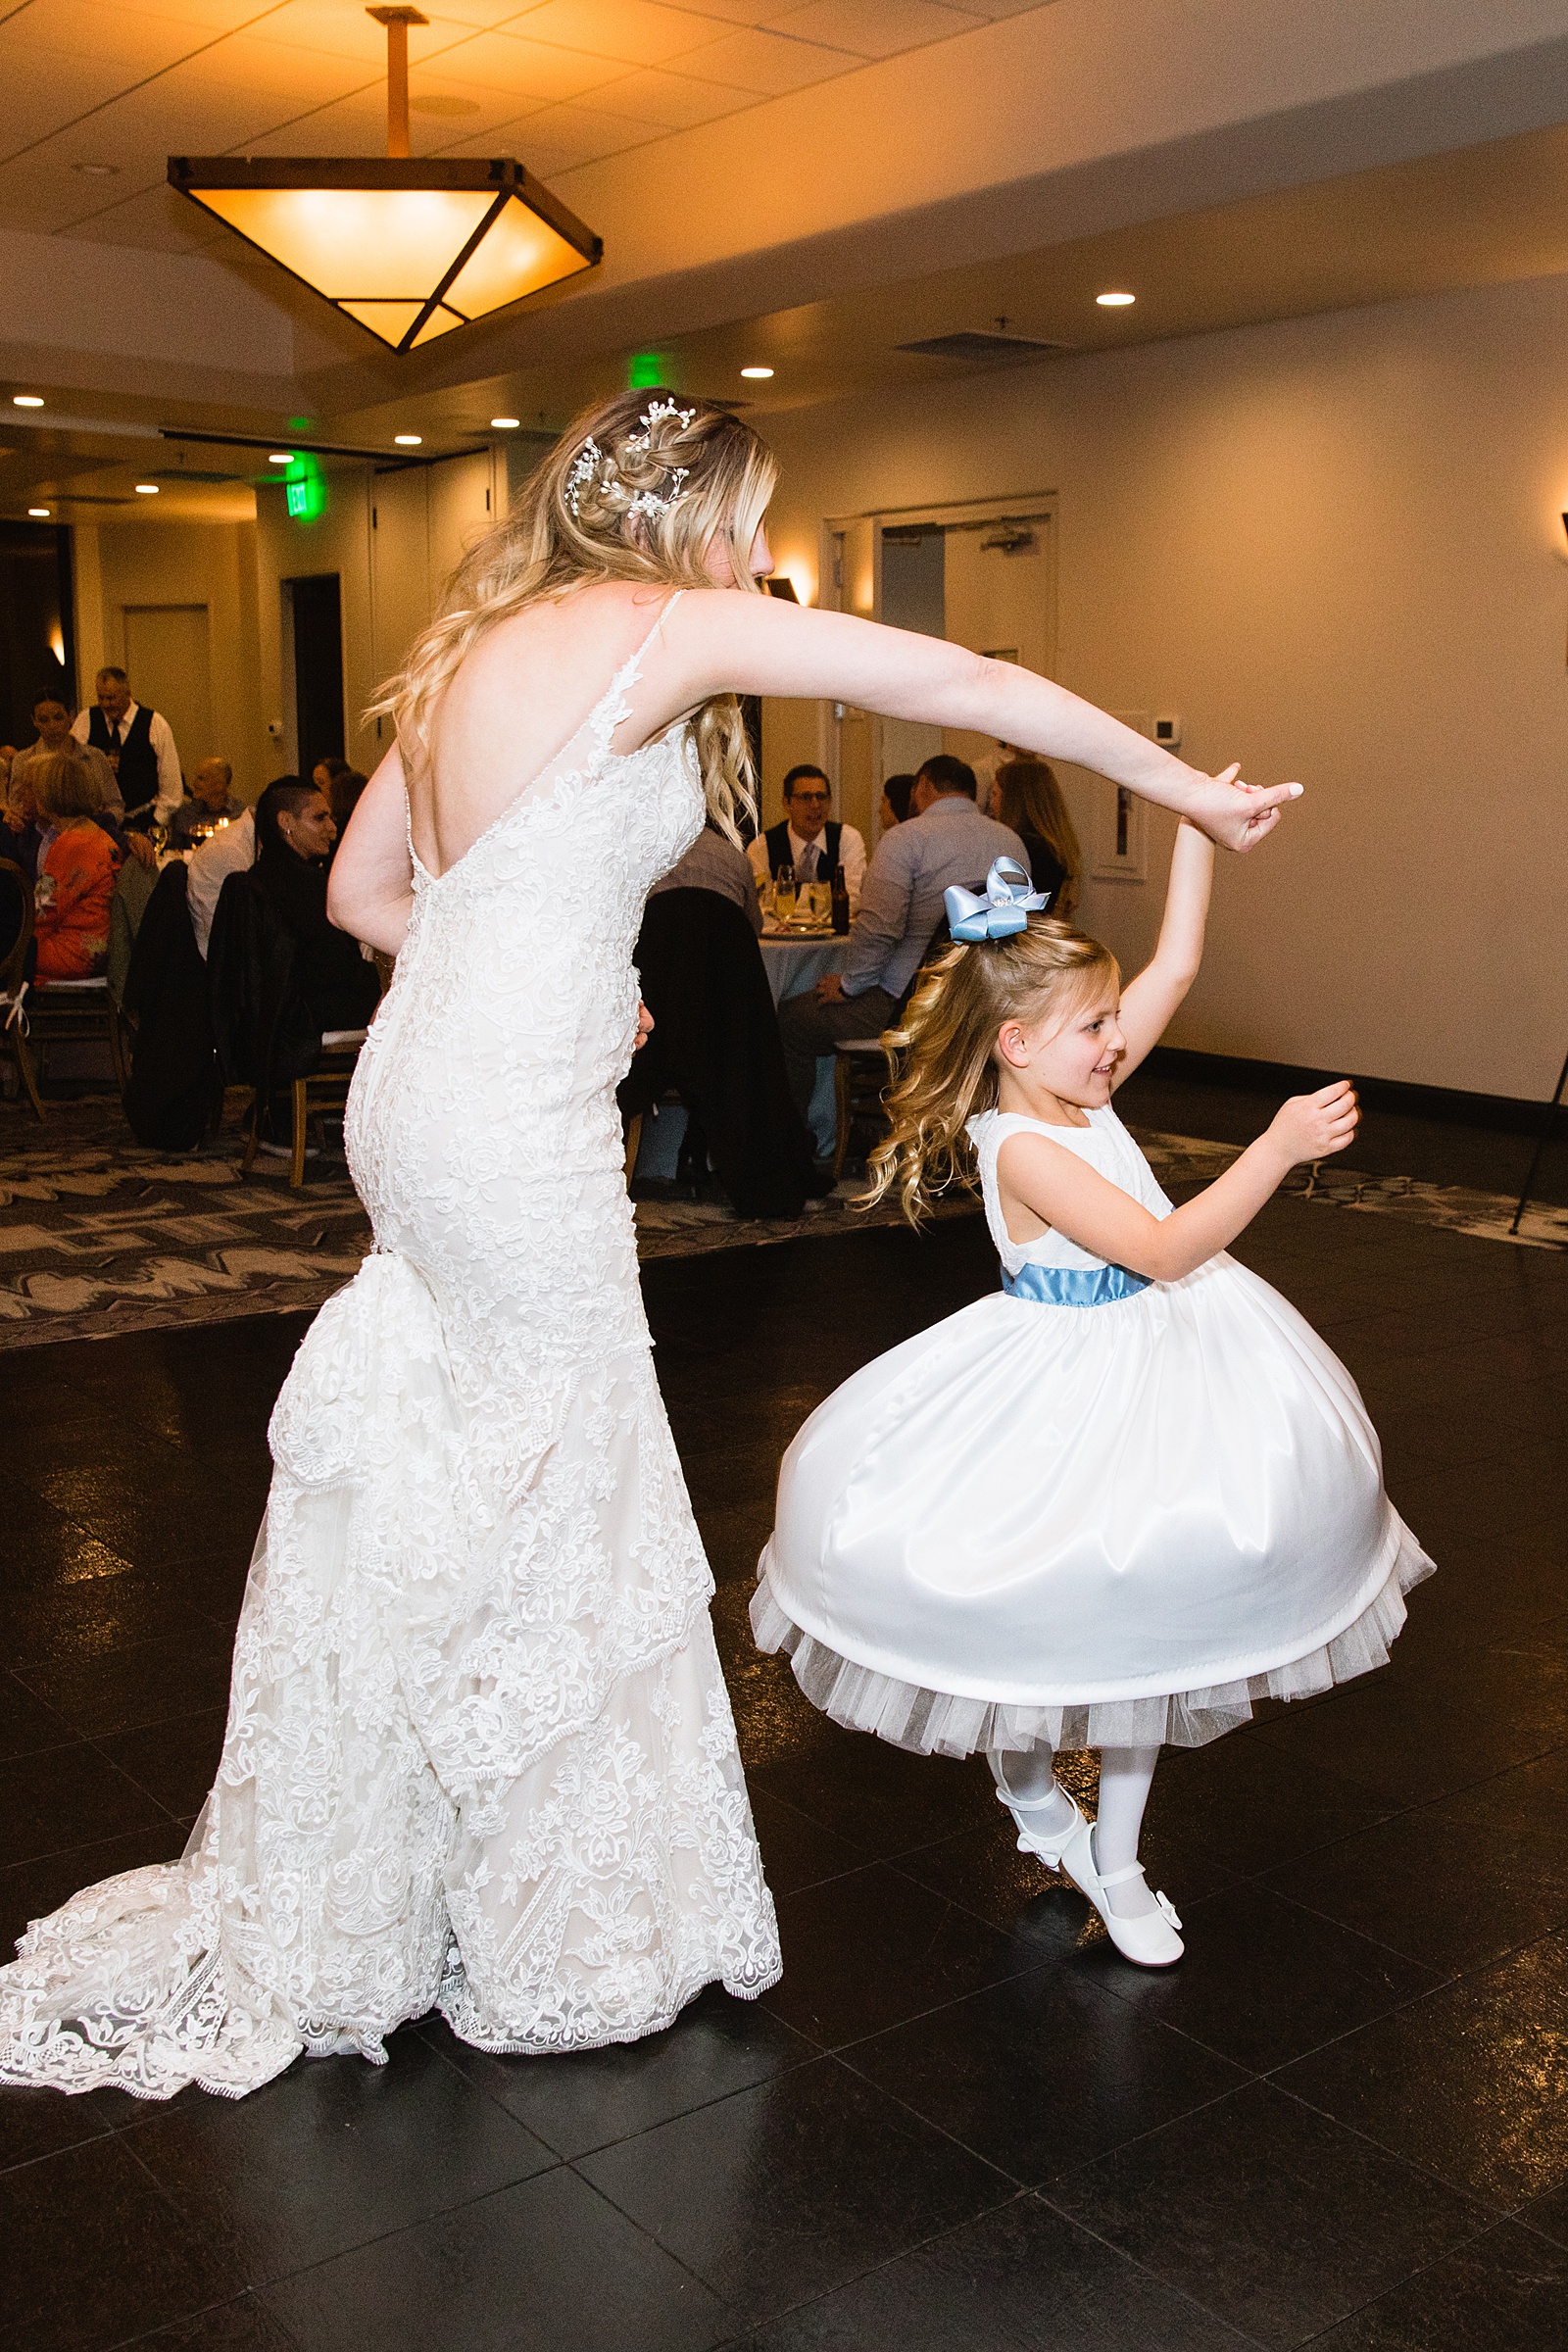 Bride dancing with guests at Troon North wedding reception by Scottsdale wedding photographer PMA Photography